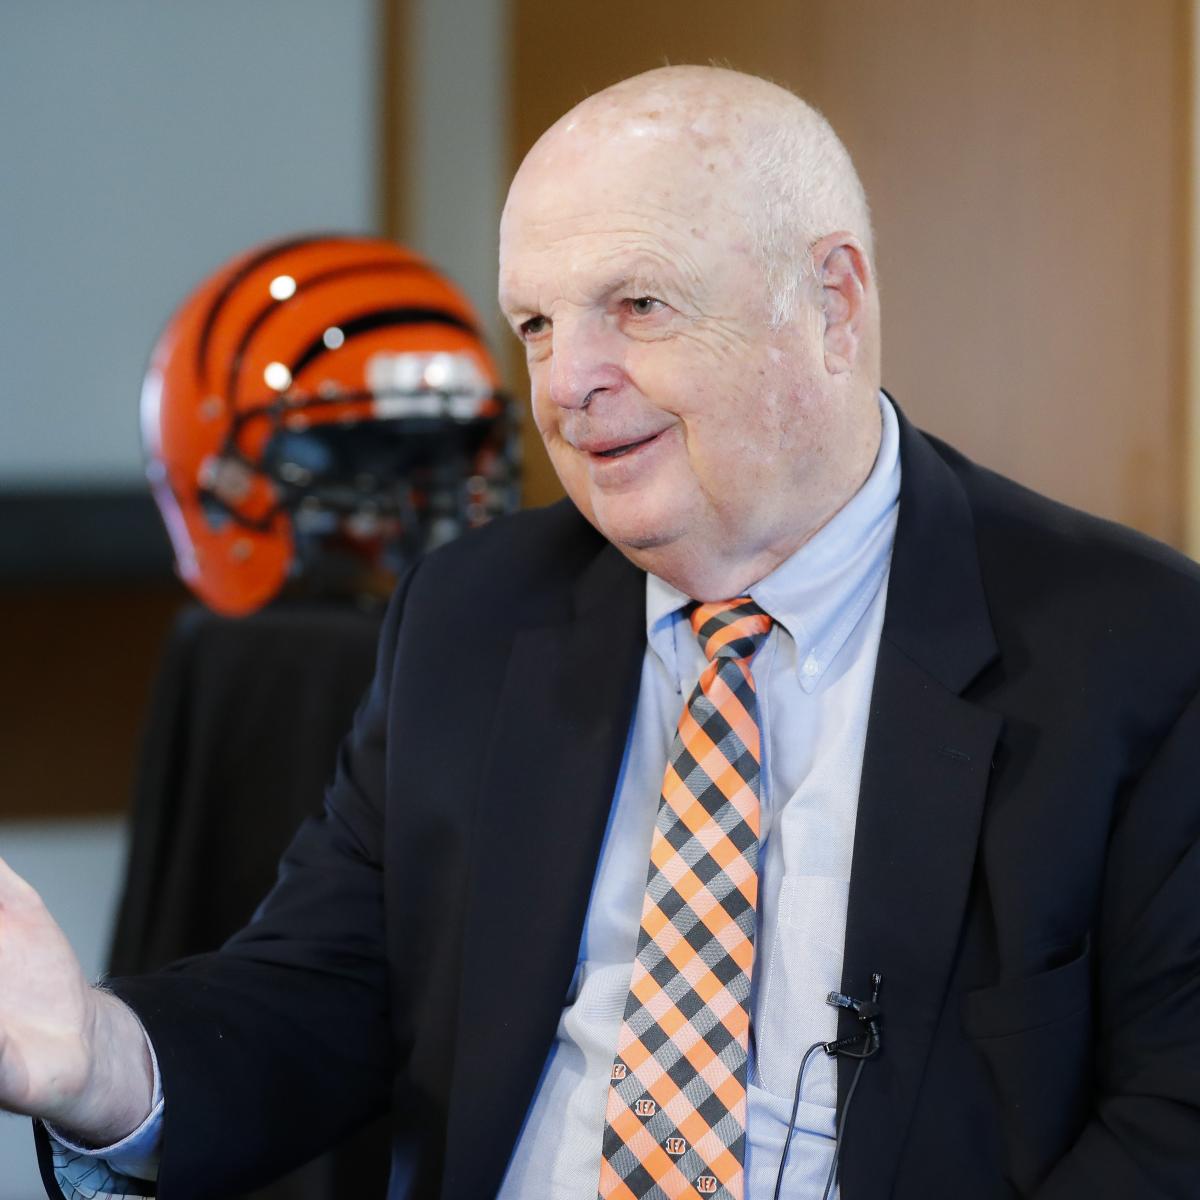 Bengals owner Mike Brown: I wanted to draft Colin Kaepernick 